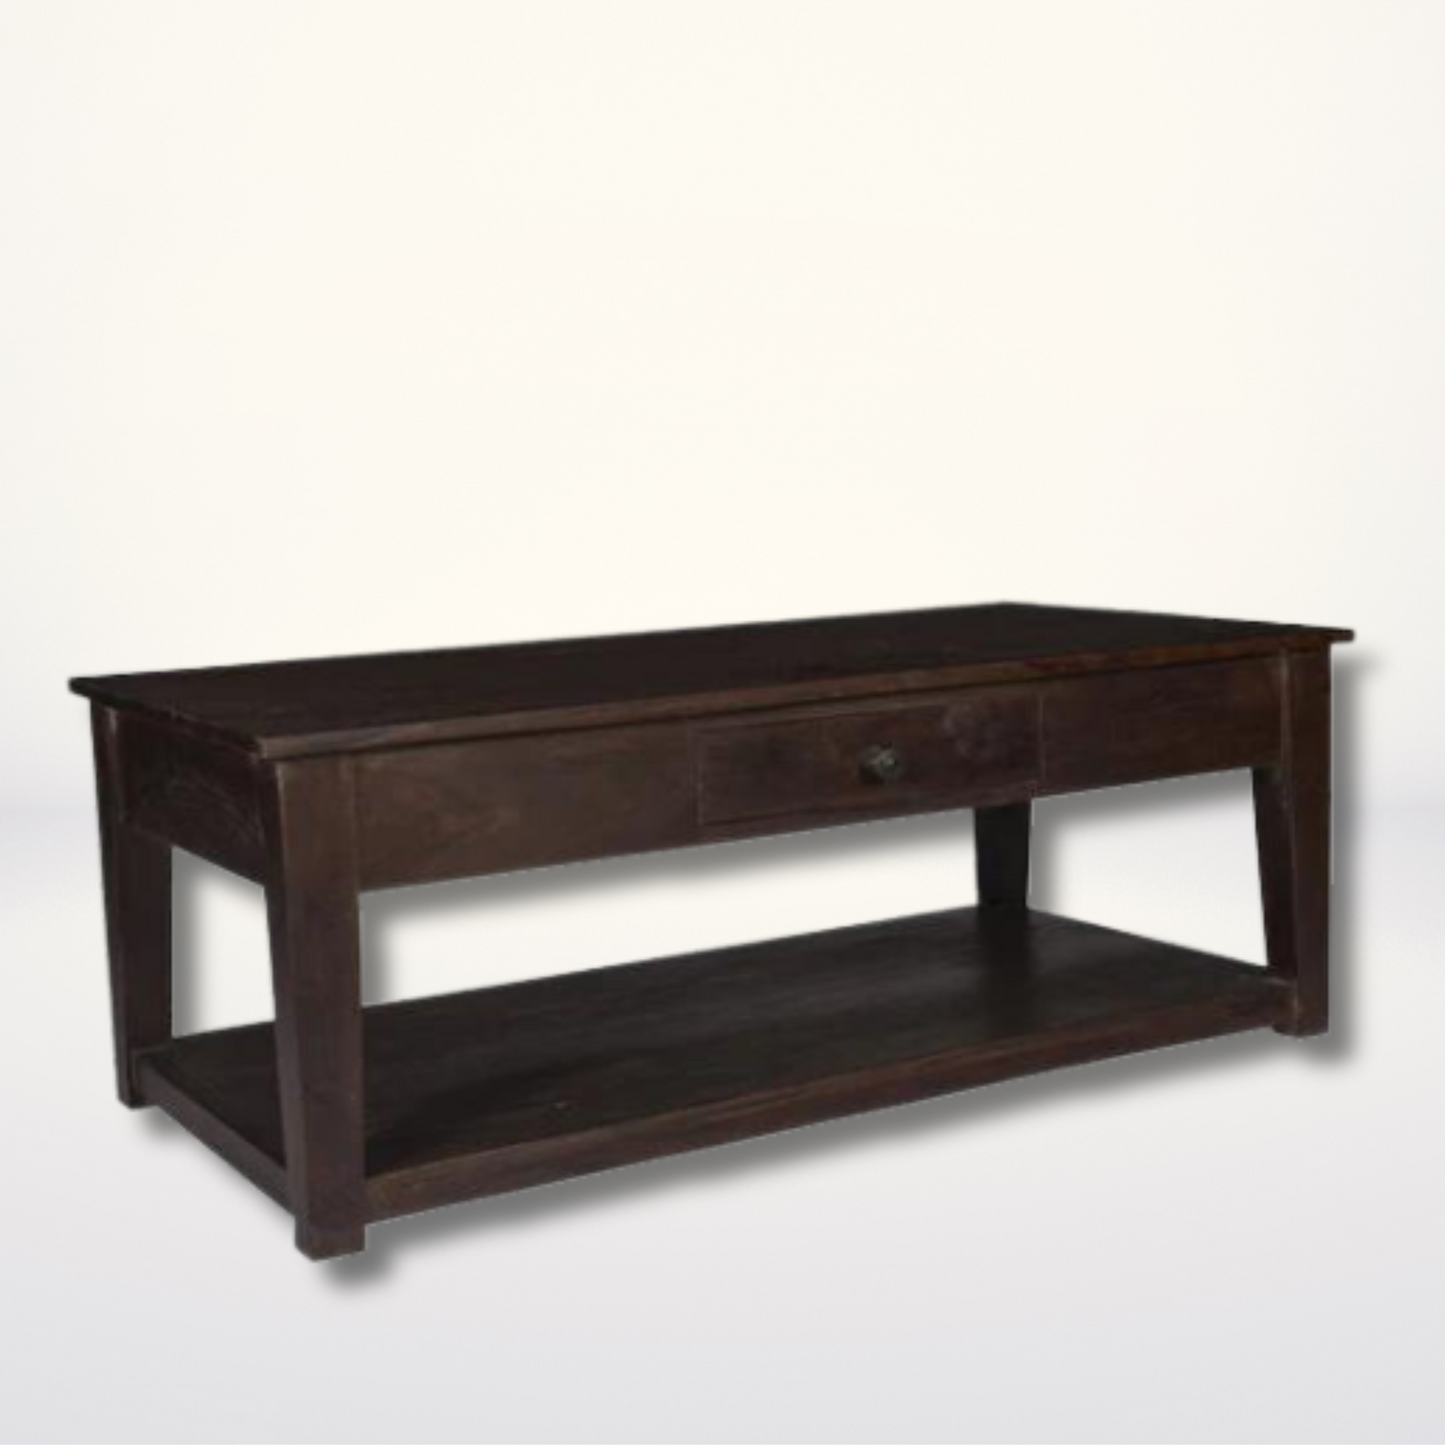 Contemporary Slim Wooden Coffee Table with Drawer - Dark - Stylla London